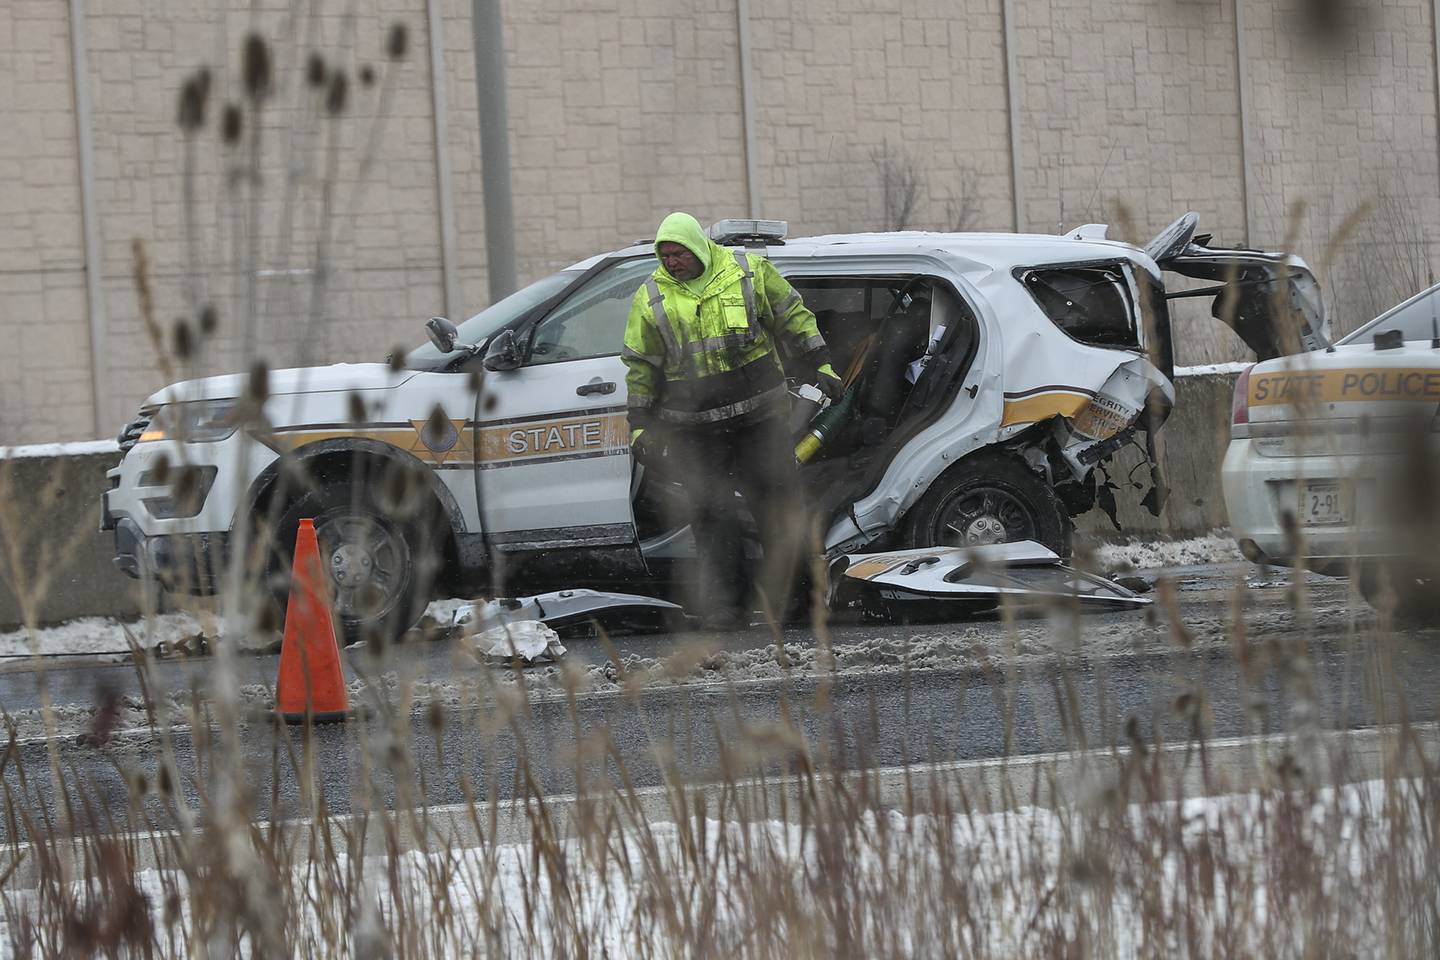 A towing company employee looks through the wreckage of an Illinois State Police vehicle involved in a crash on Monday, Feb. 15, 2021, at I55 North and US Rt. 30 in Joliet, Ill. A cash on I55 northbound resulted in an Illinois State Police being airlifted to a nearby hospital and the expressway shut down for hours.